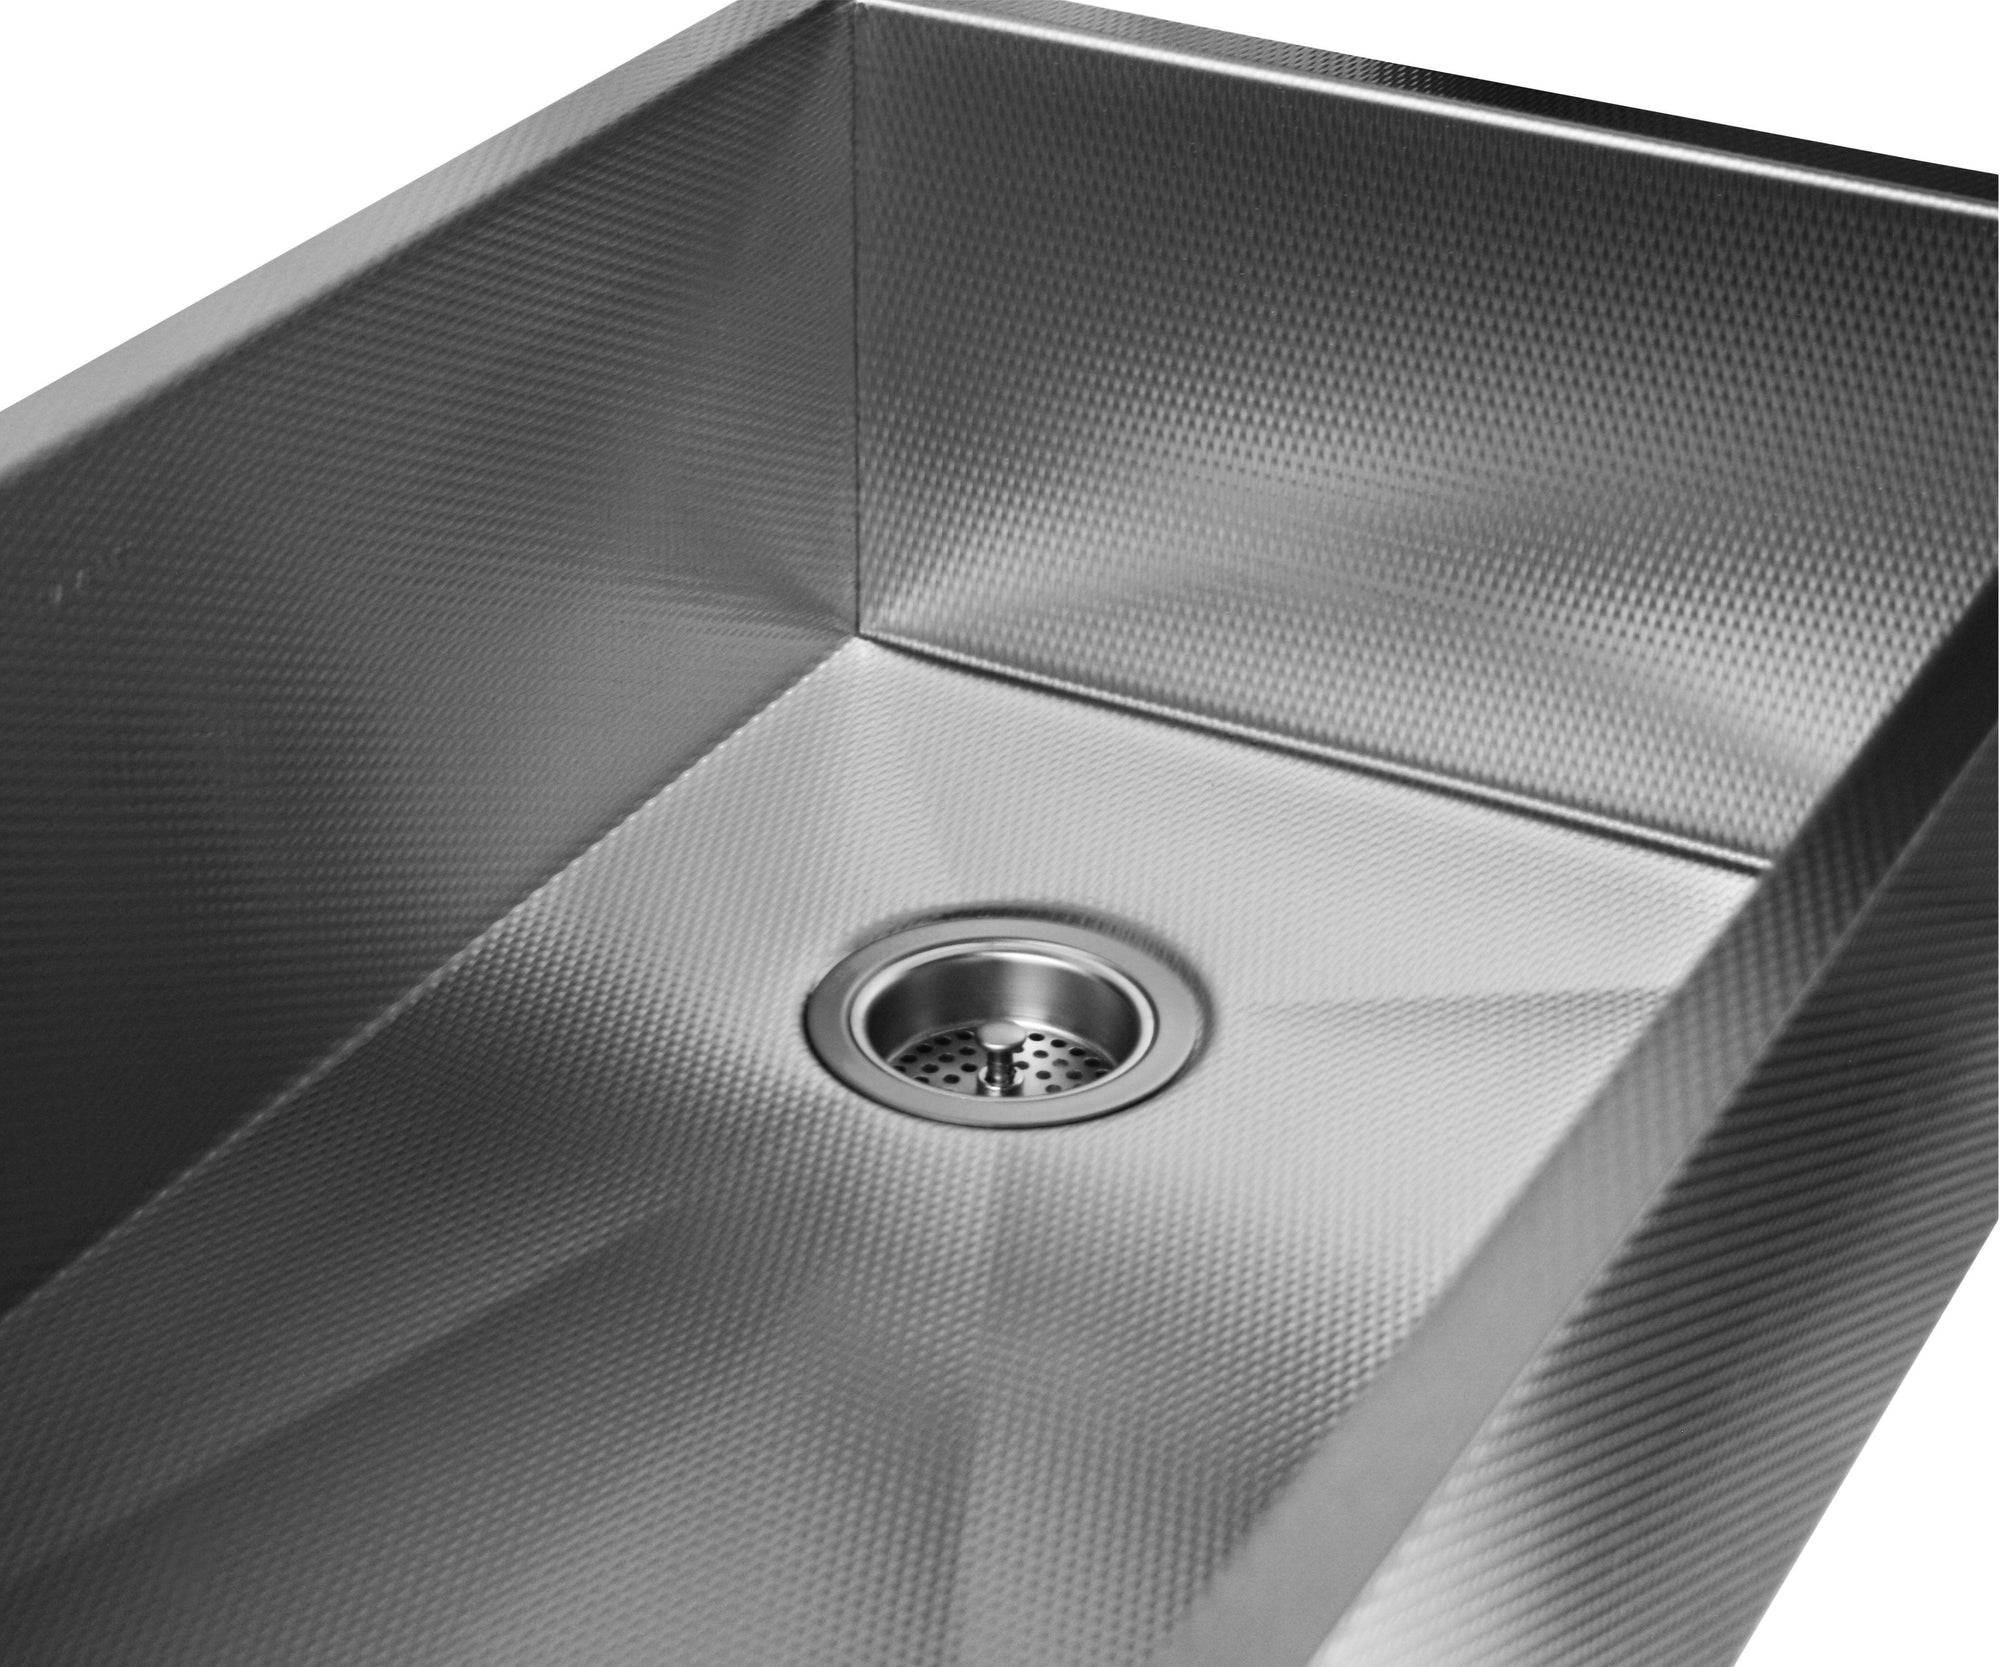 Stainless steel textured sink made from an American 16 gauge.